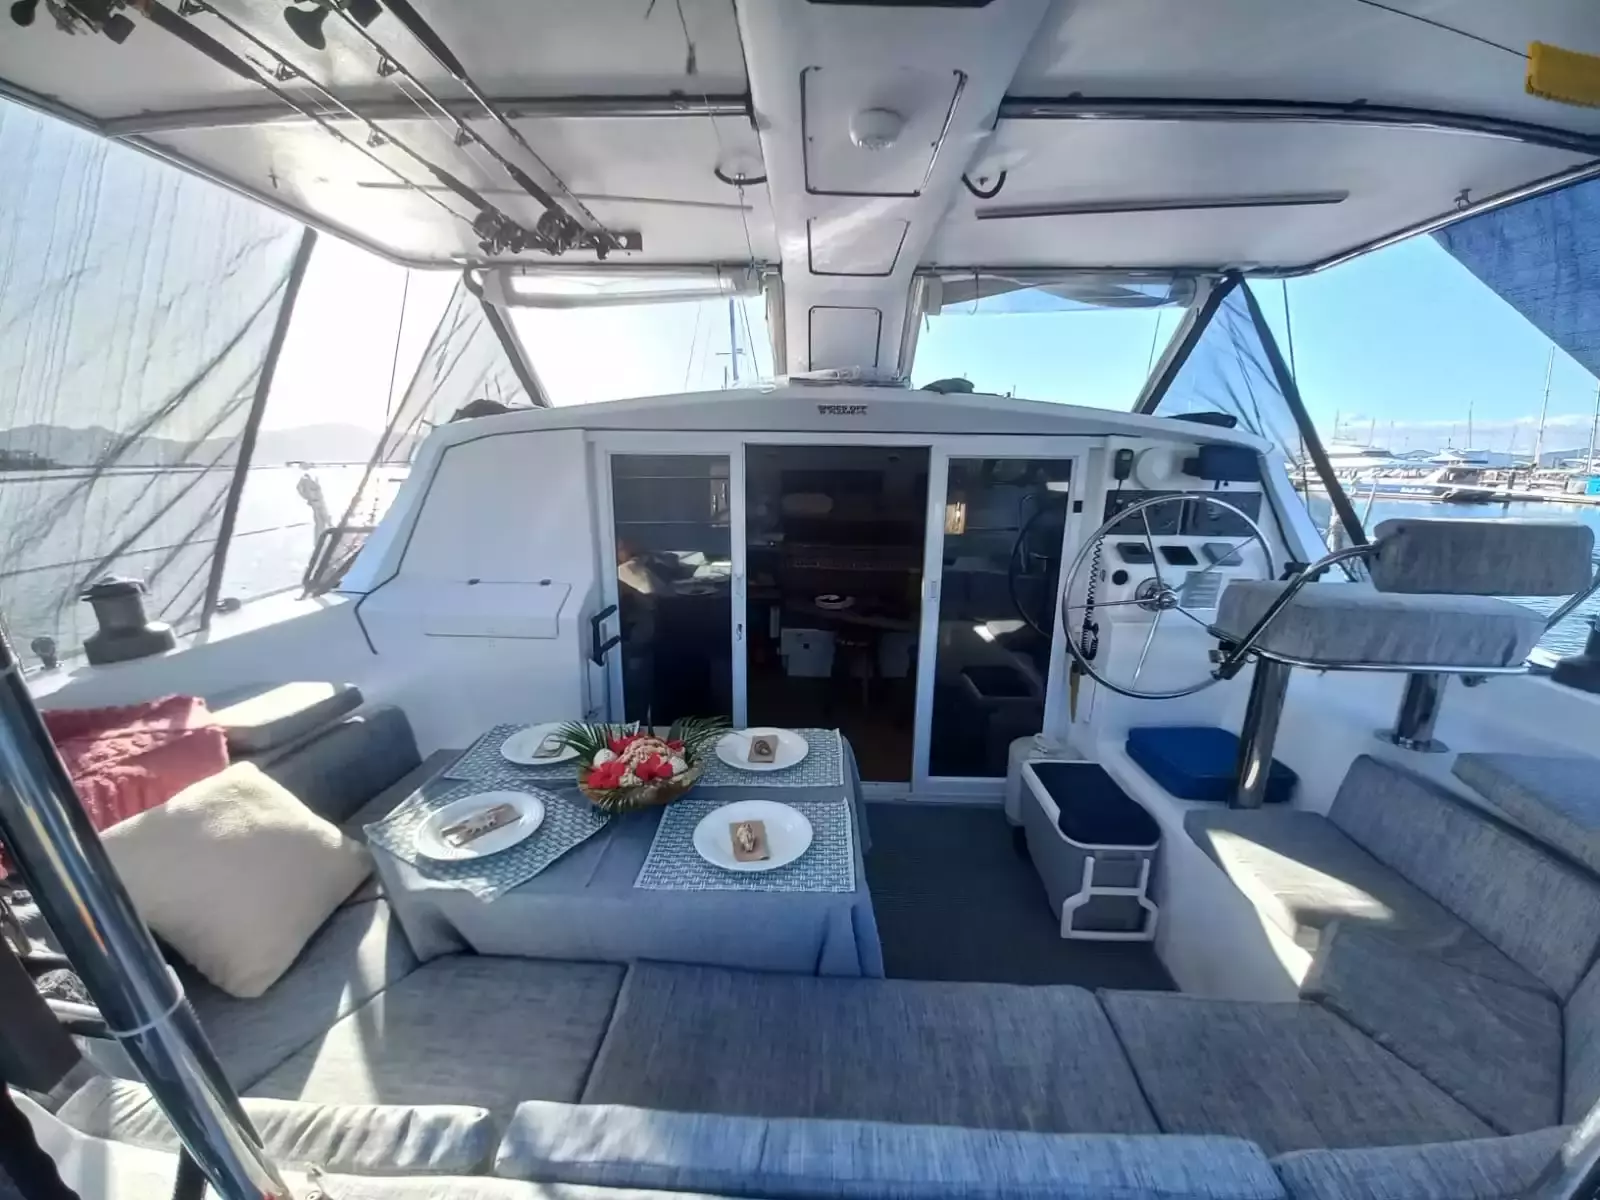 XXX by Knysna - Top rates for a Rental of a private Sailing Catamaran in Fiji